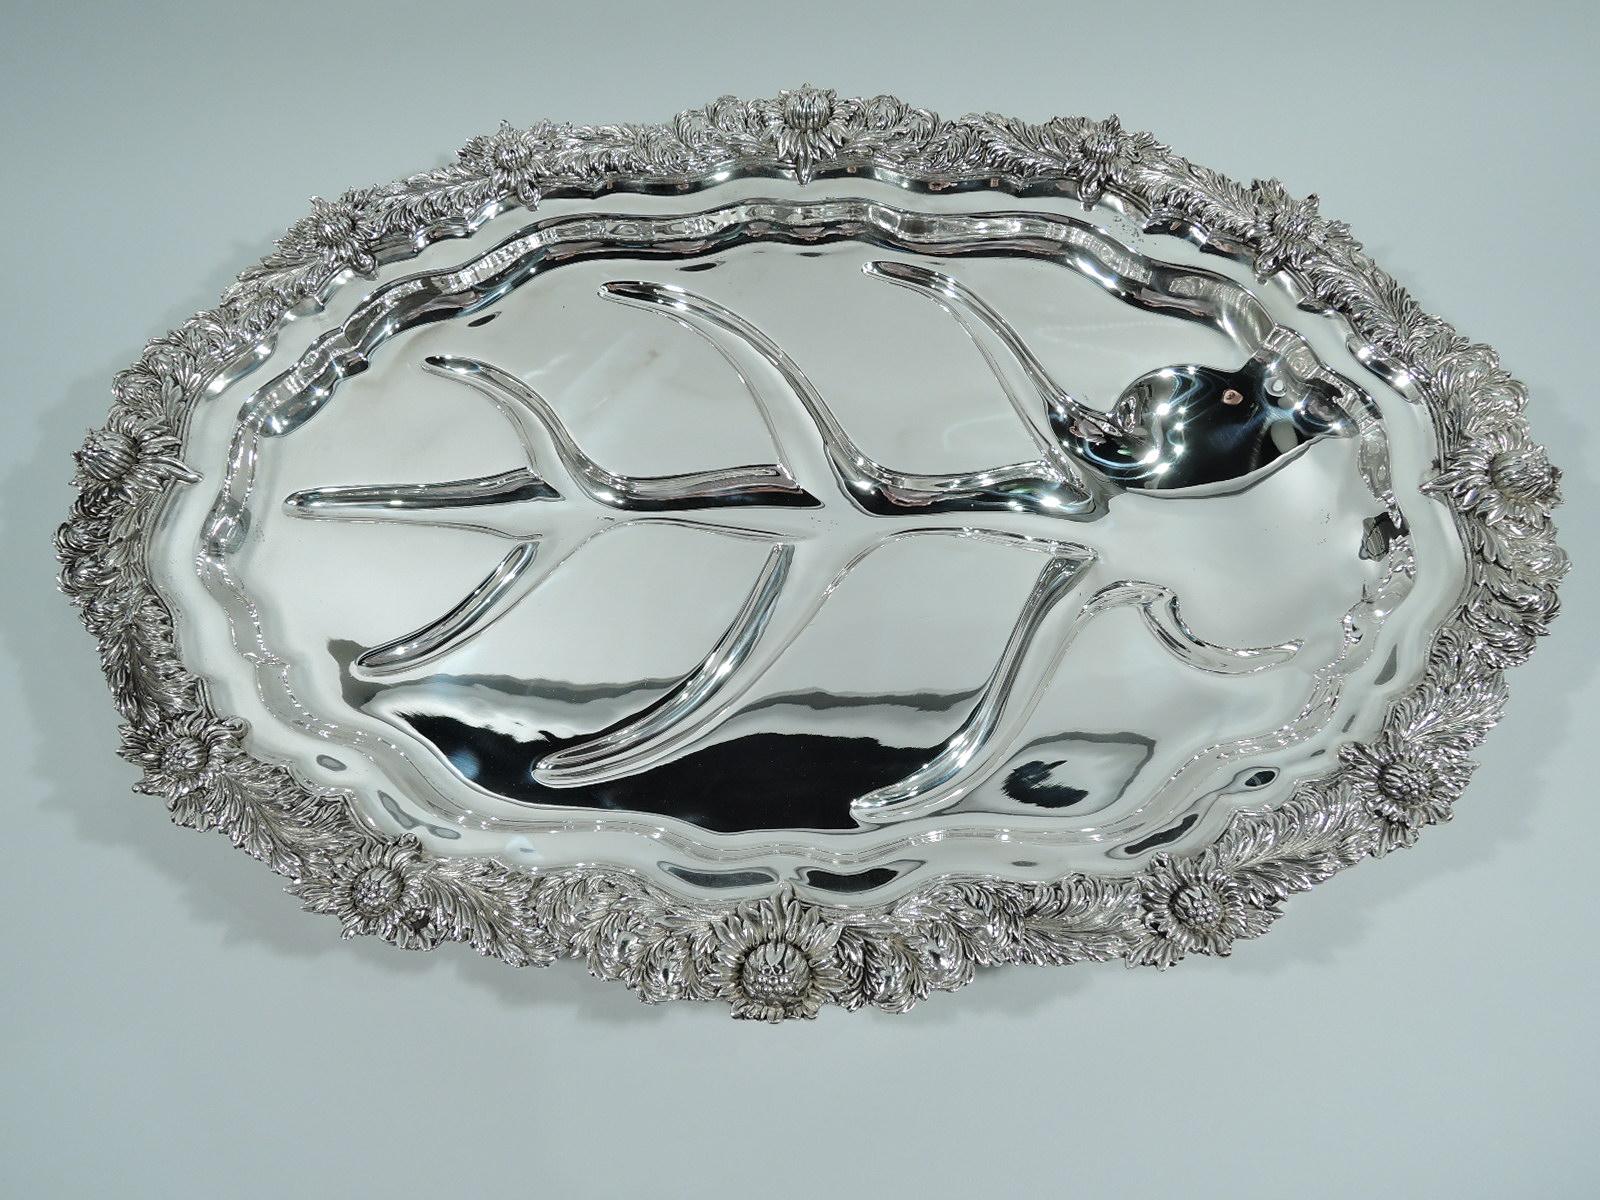 Chrysanthemum sterling silver meat platter. Made by Tiffany & Co. in New York. Shaped oval well with tree of life to collect the rivulets of precious pan juices. Irregular rim with the famous chrysanthemum flower heads alternating with leaves in